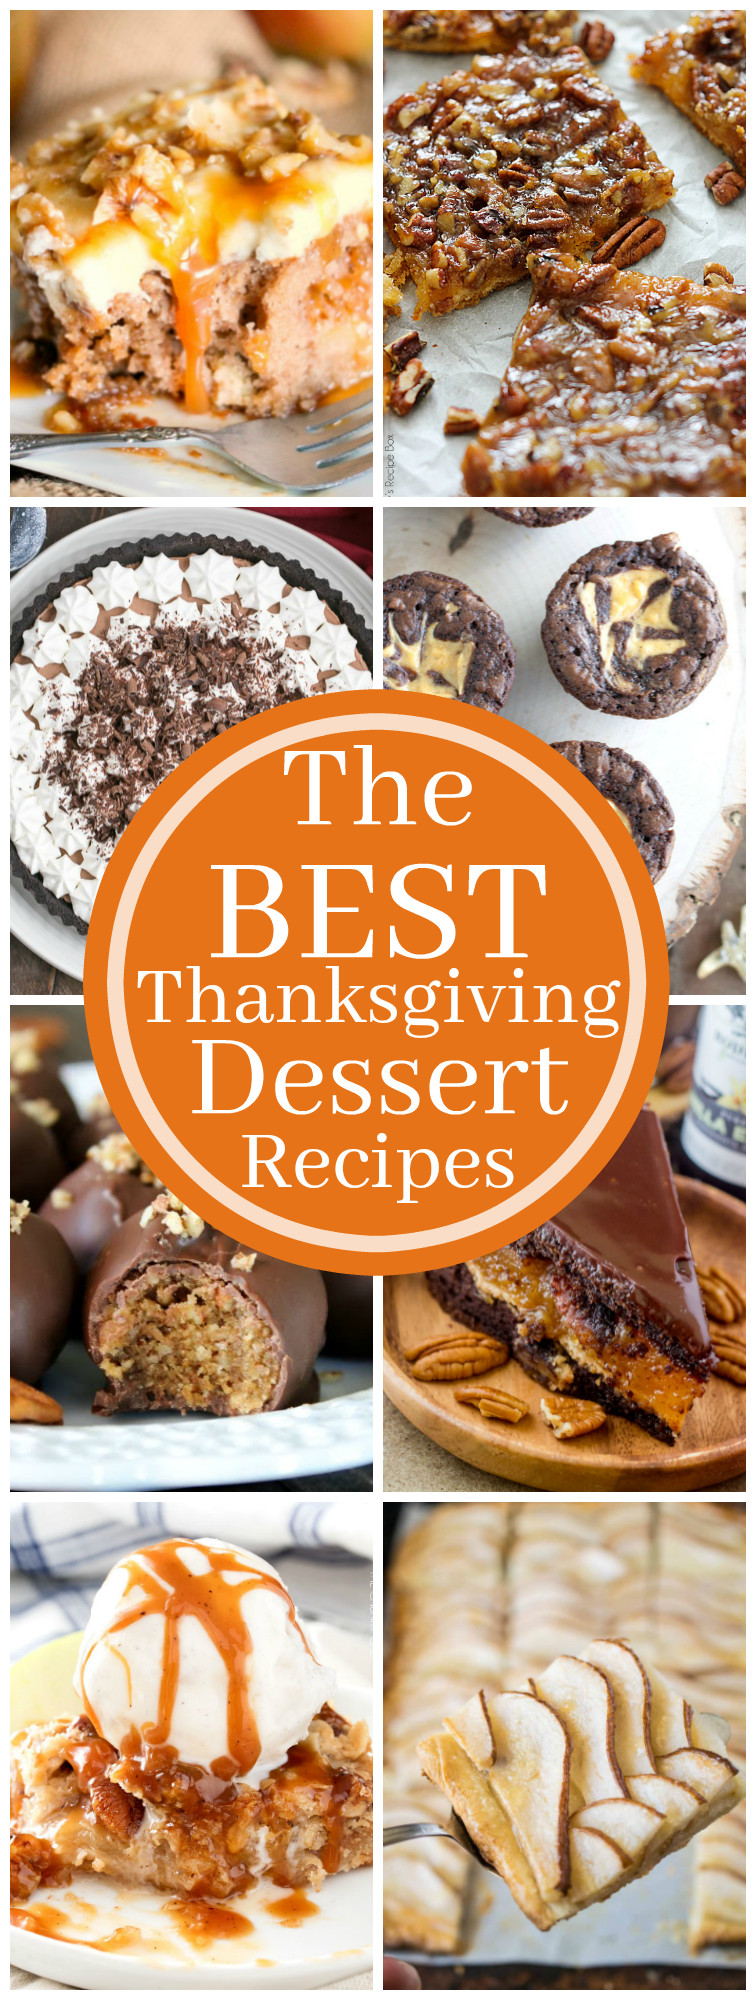 The Kitchen Thanksgiving Recipes
 The Best Thanksgiving Dessert Recipes My Kitchen Craze